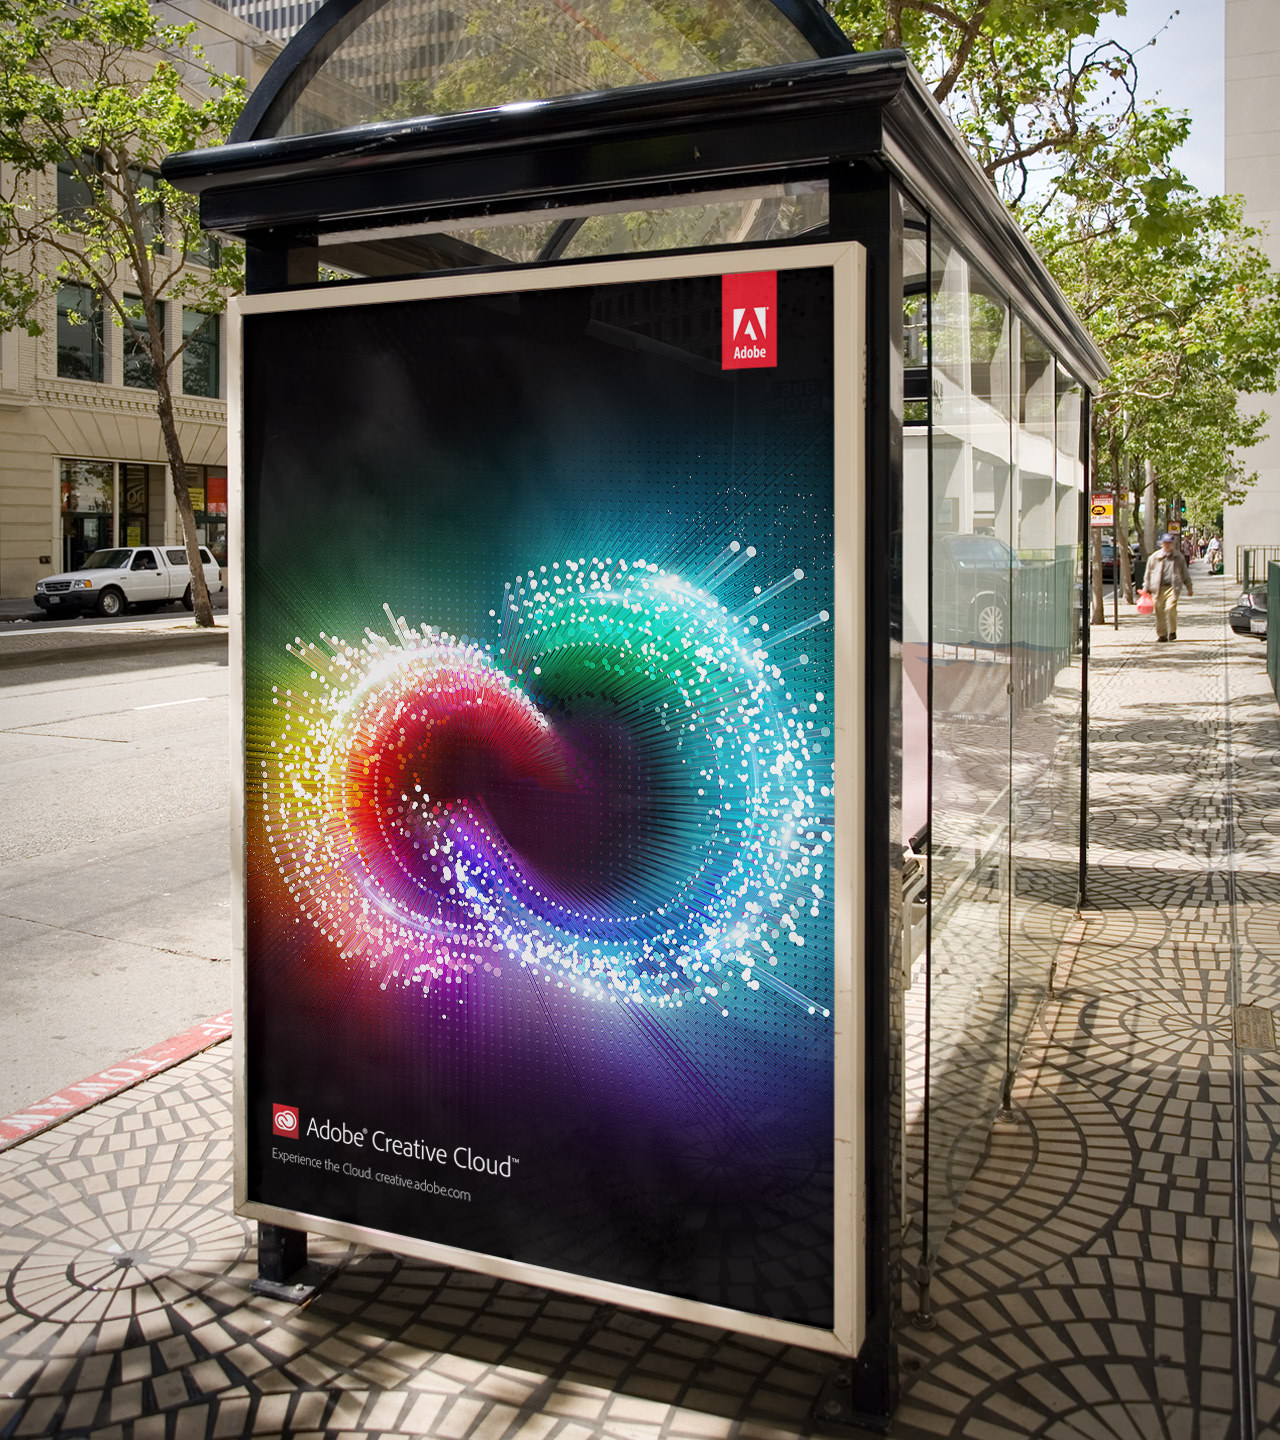 https://tolleson.com/wp-content/uploads/2015/04/adobe-creative-cloud-bus-shelter-poster.jpg